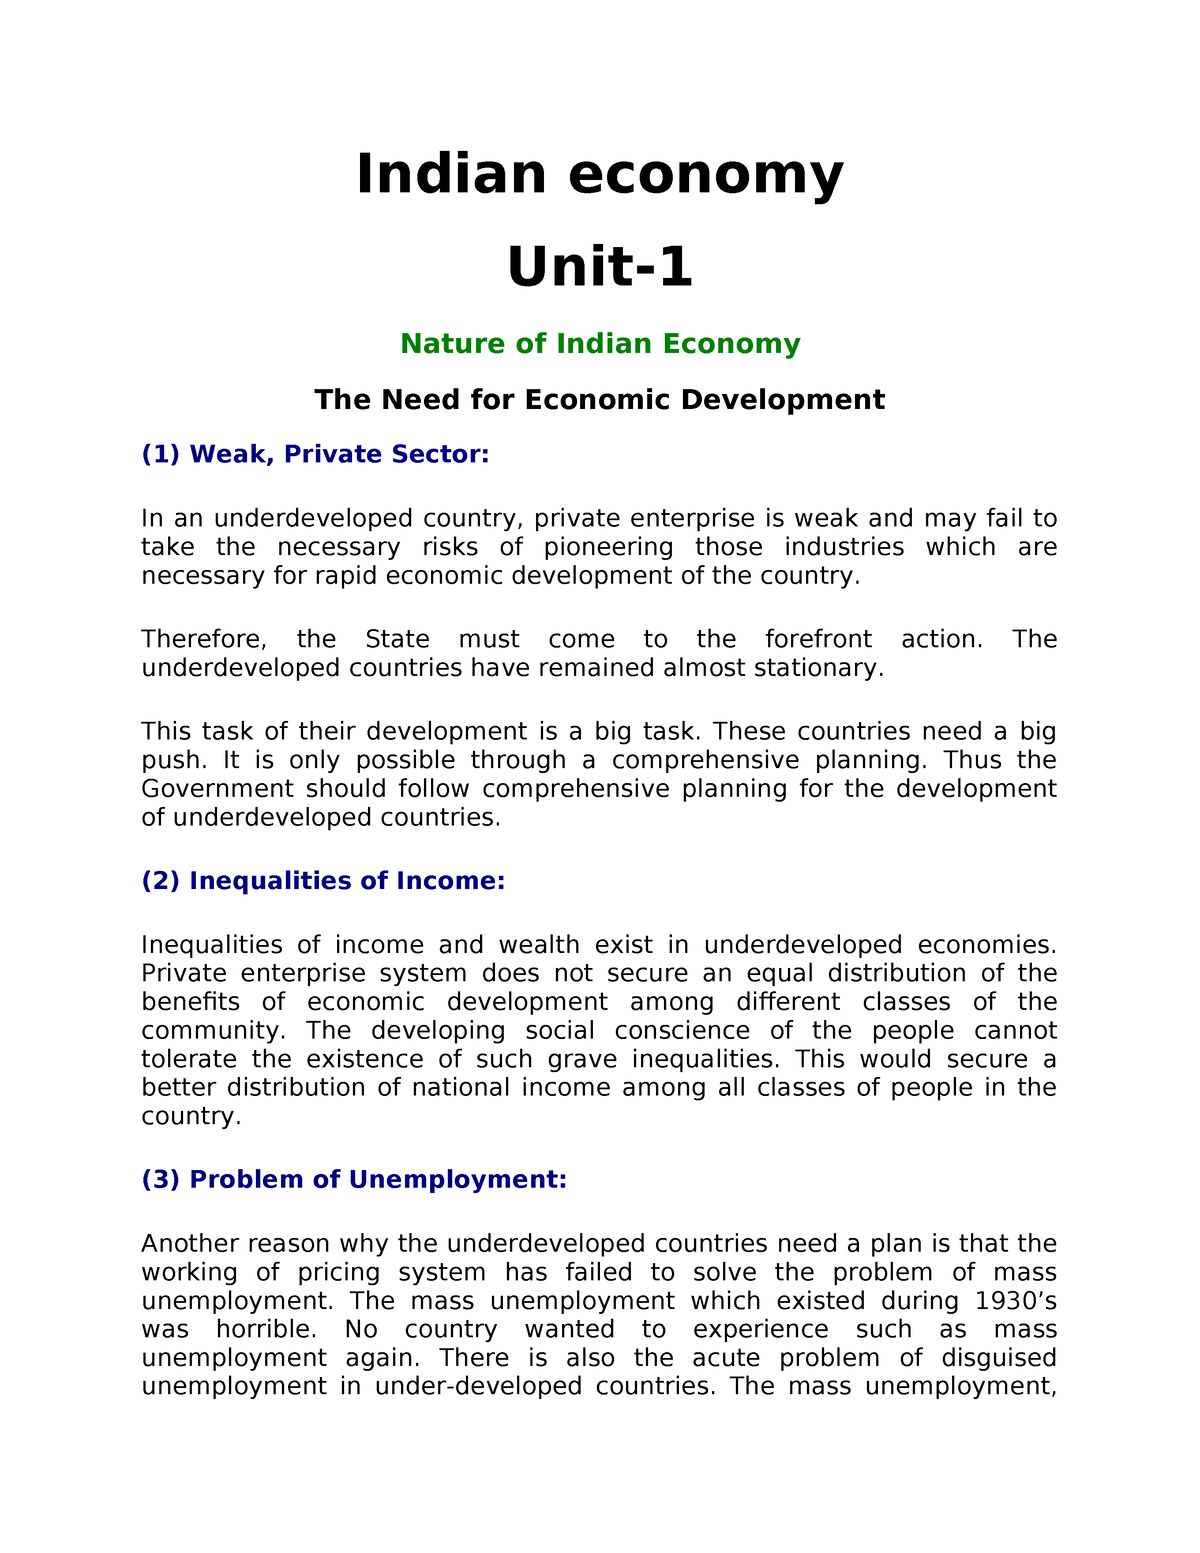 research paper in indian economy